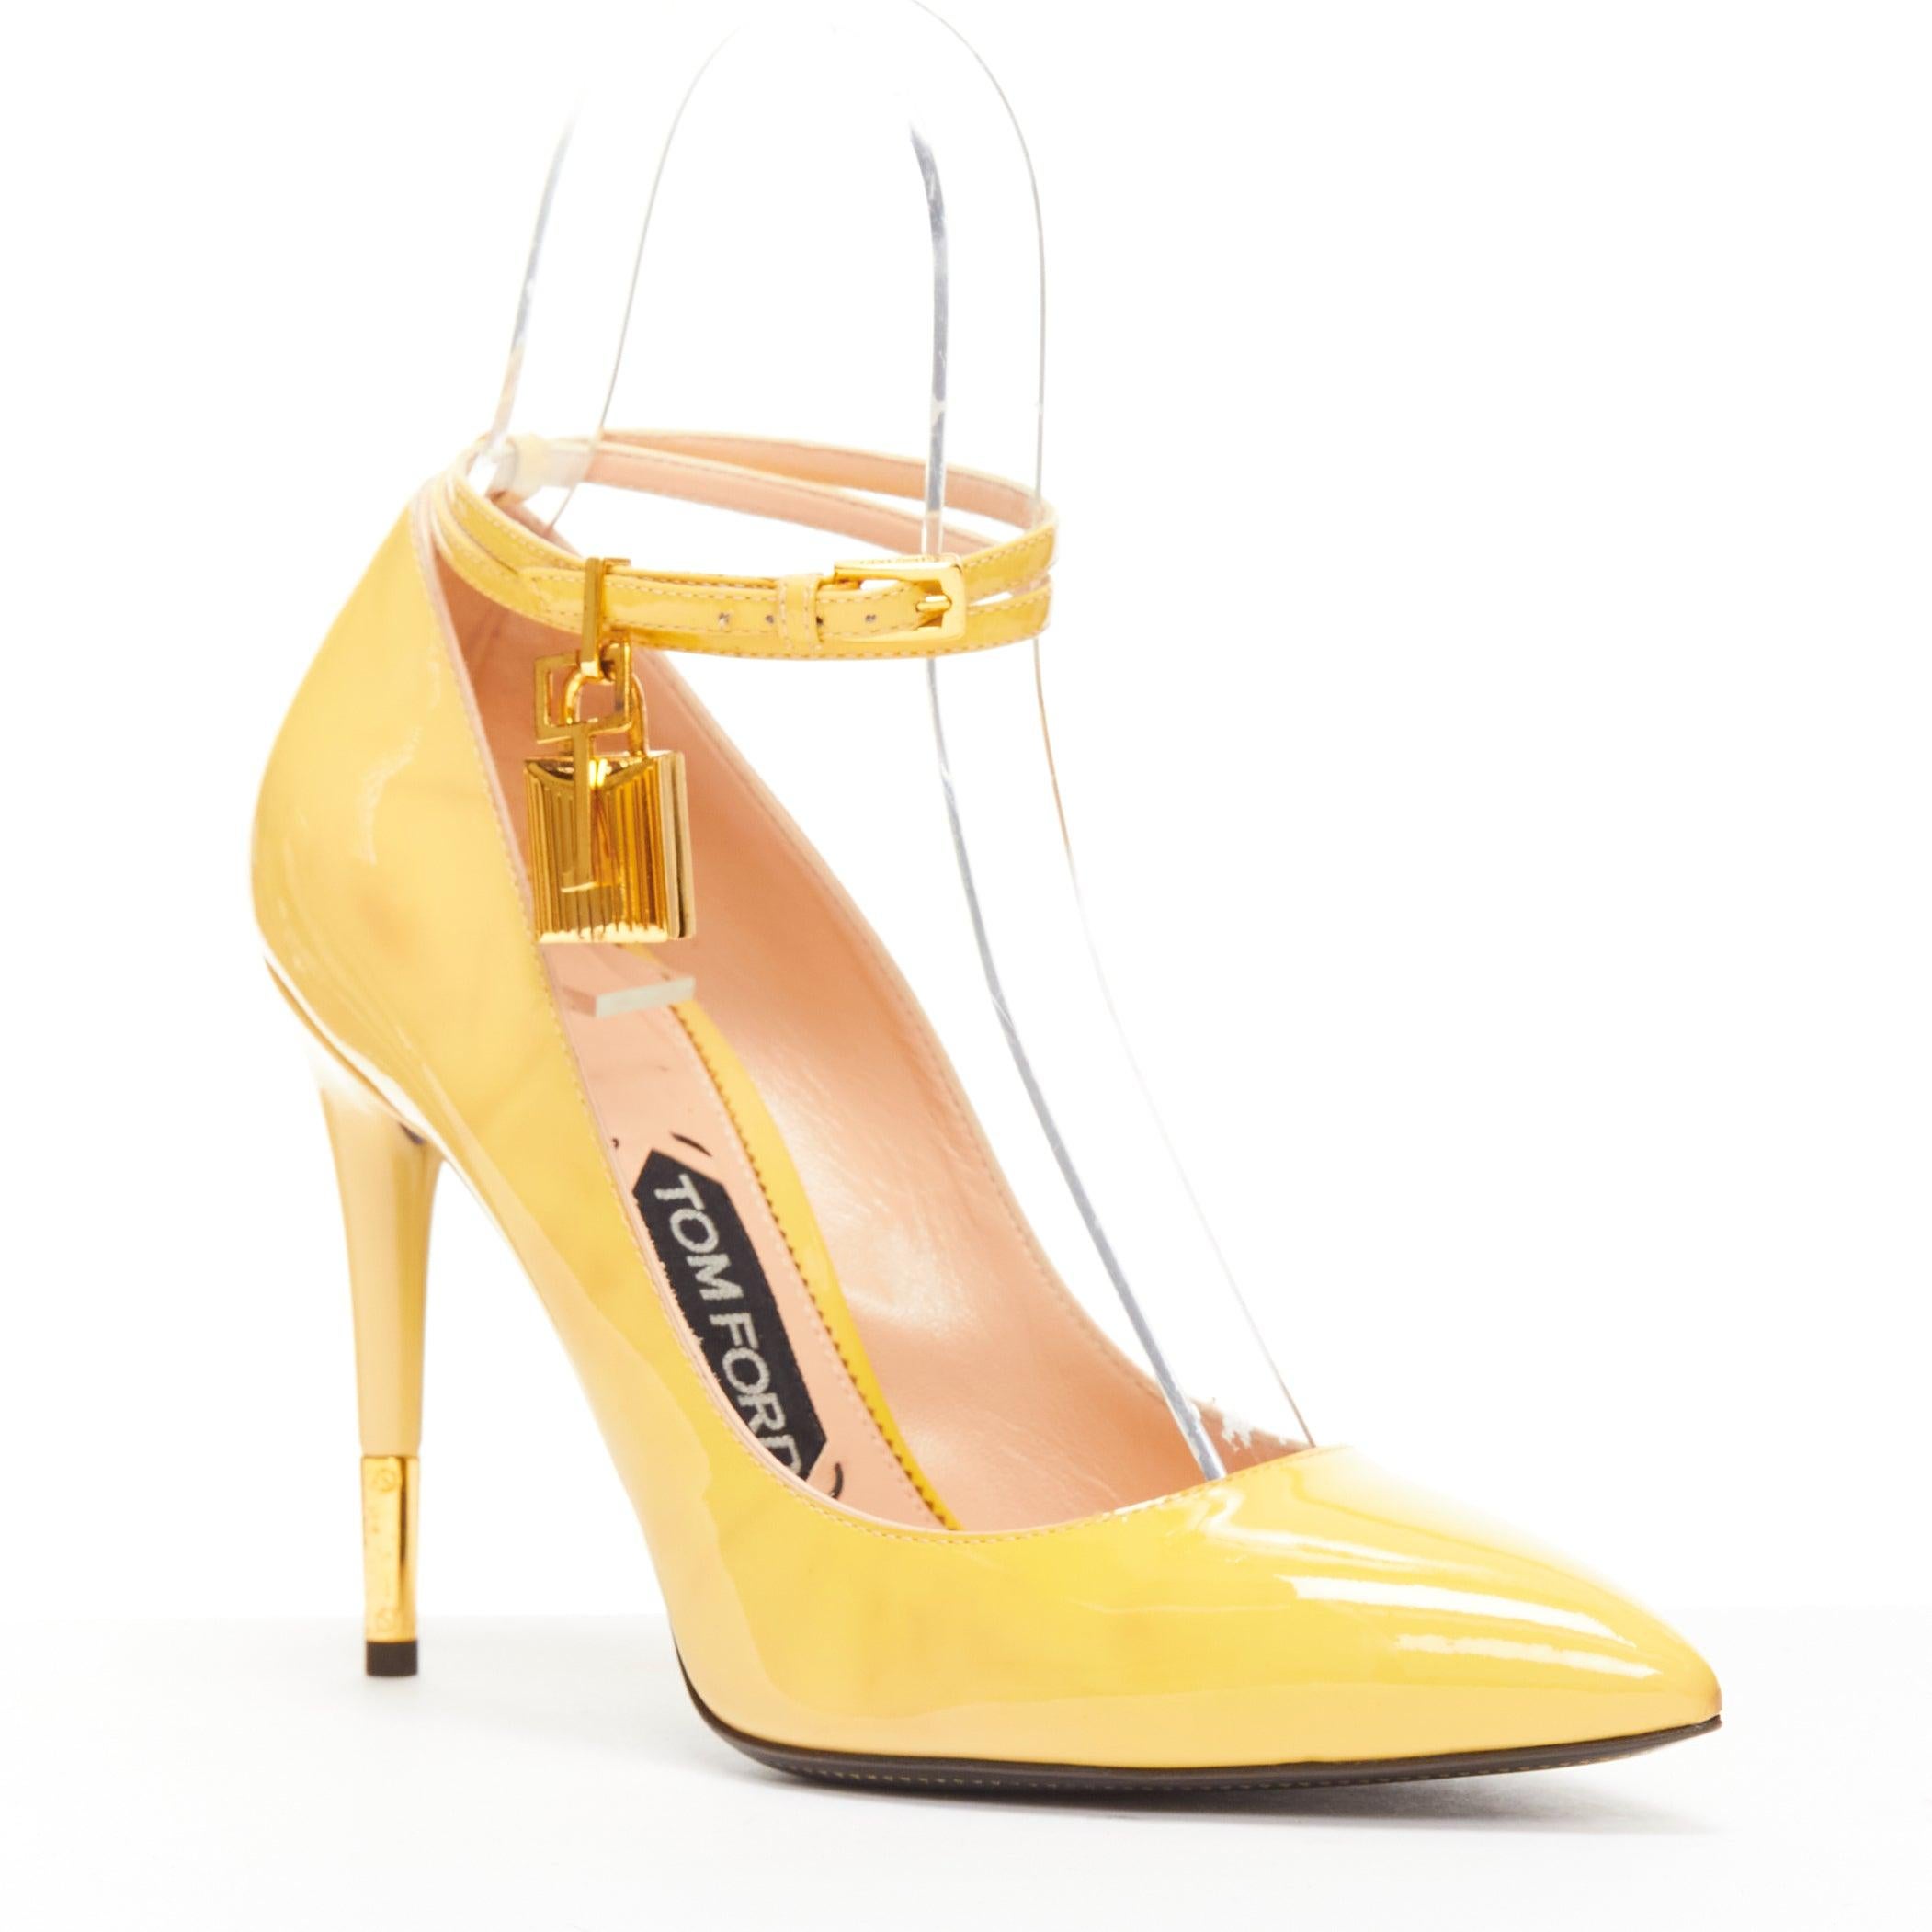 TOM FORD Padlock yellow patent leather gold key lock charm strappy sandals EU37
Reference: TGAS/D01096
Brand: Tom Ford
Designer: Tom Ford
Model: Padlock
Material: Leather
Color: Yellow, Gold
Pattern: Solid
Closure: Ankle Strap
Lining: Nude